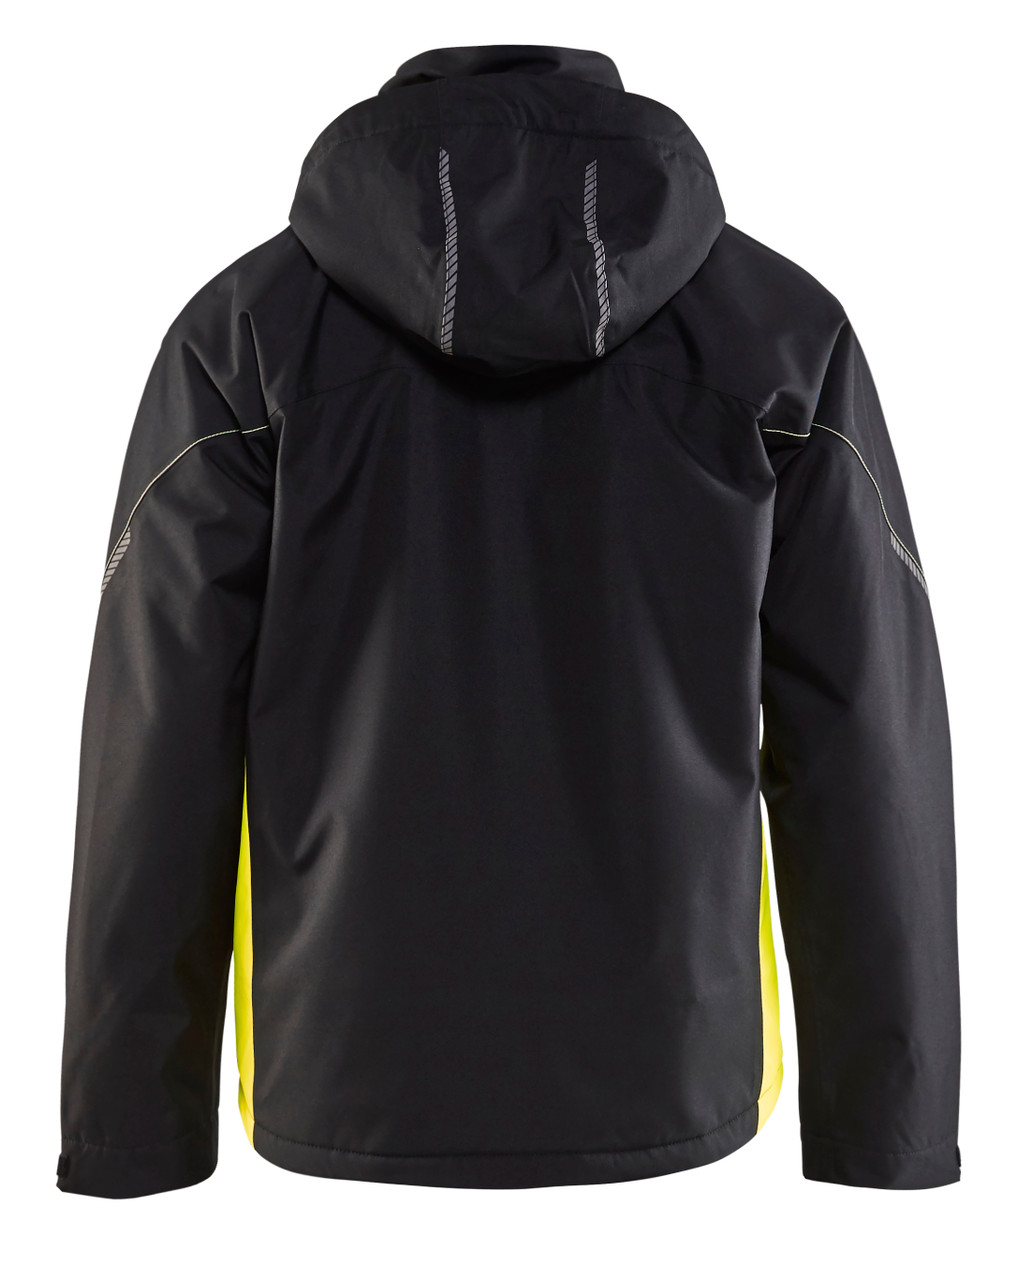 BLAKLADER Jacket  4790  with  for BLAKLADER Jacket  | 4790 Mens Black / Yellow Full Zip Shell Jacket in Polyester Waterproof that have Full Zip  available in Australia and New Zealand